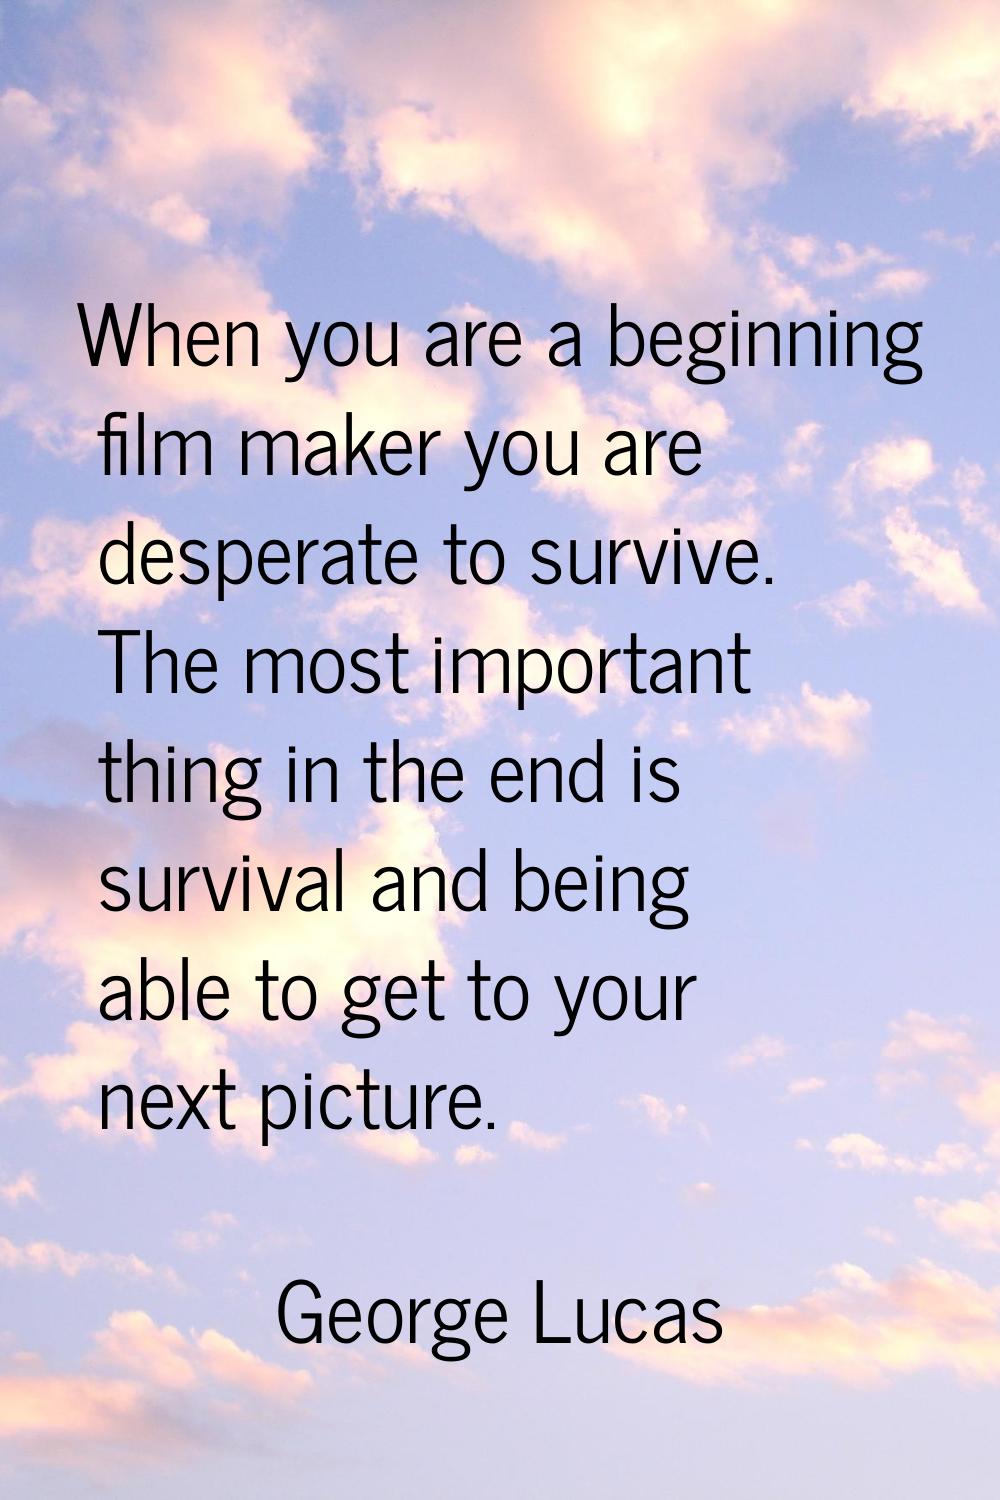 When you are a beginning film maker you are desperate to survive. The most important thing in the e